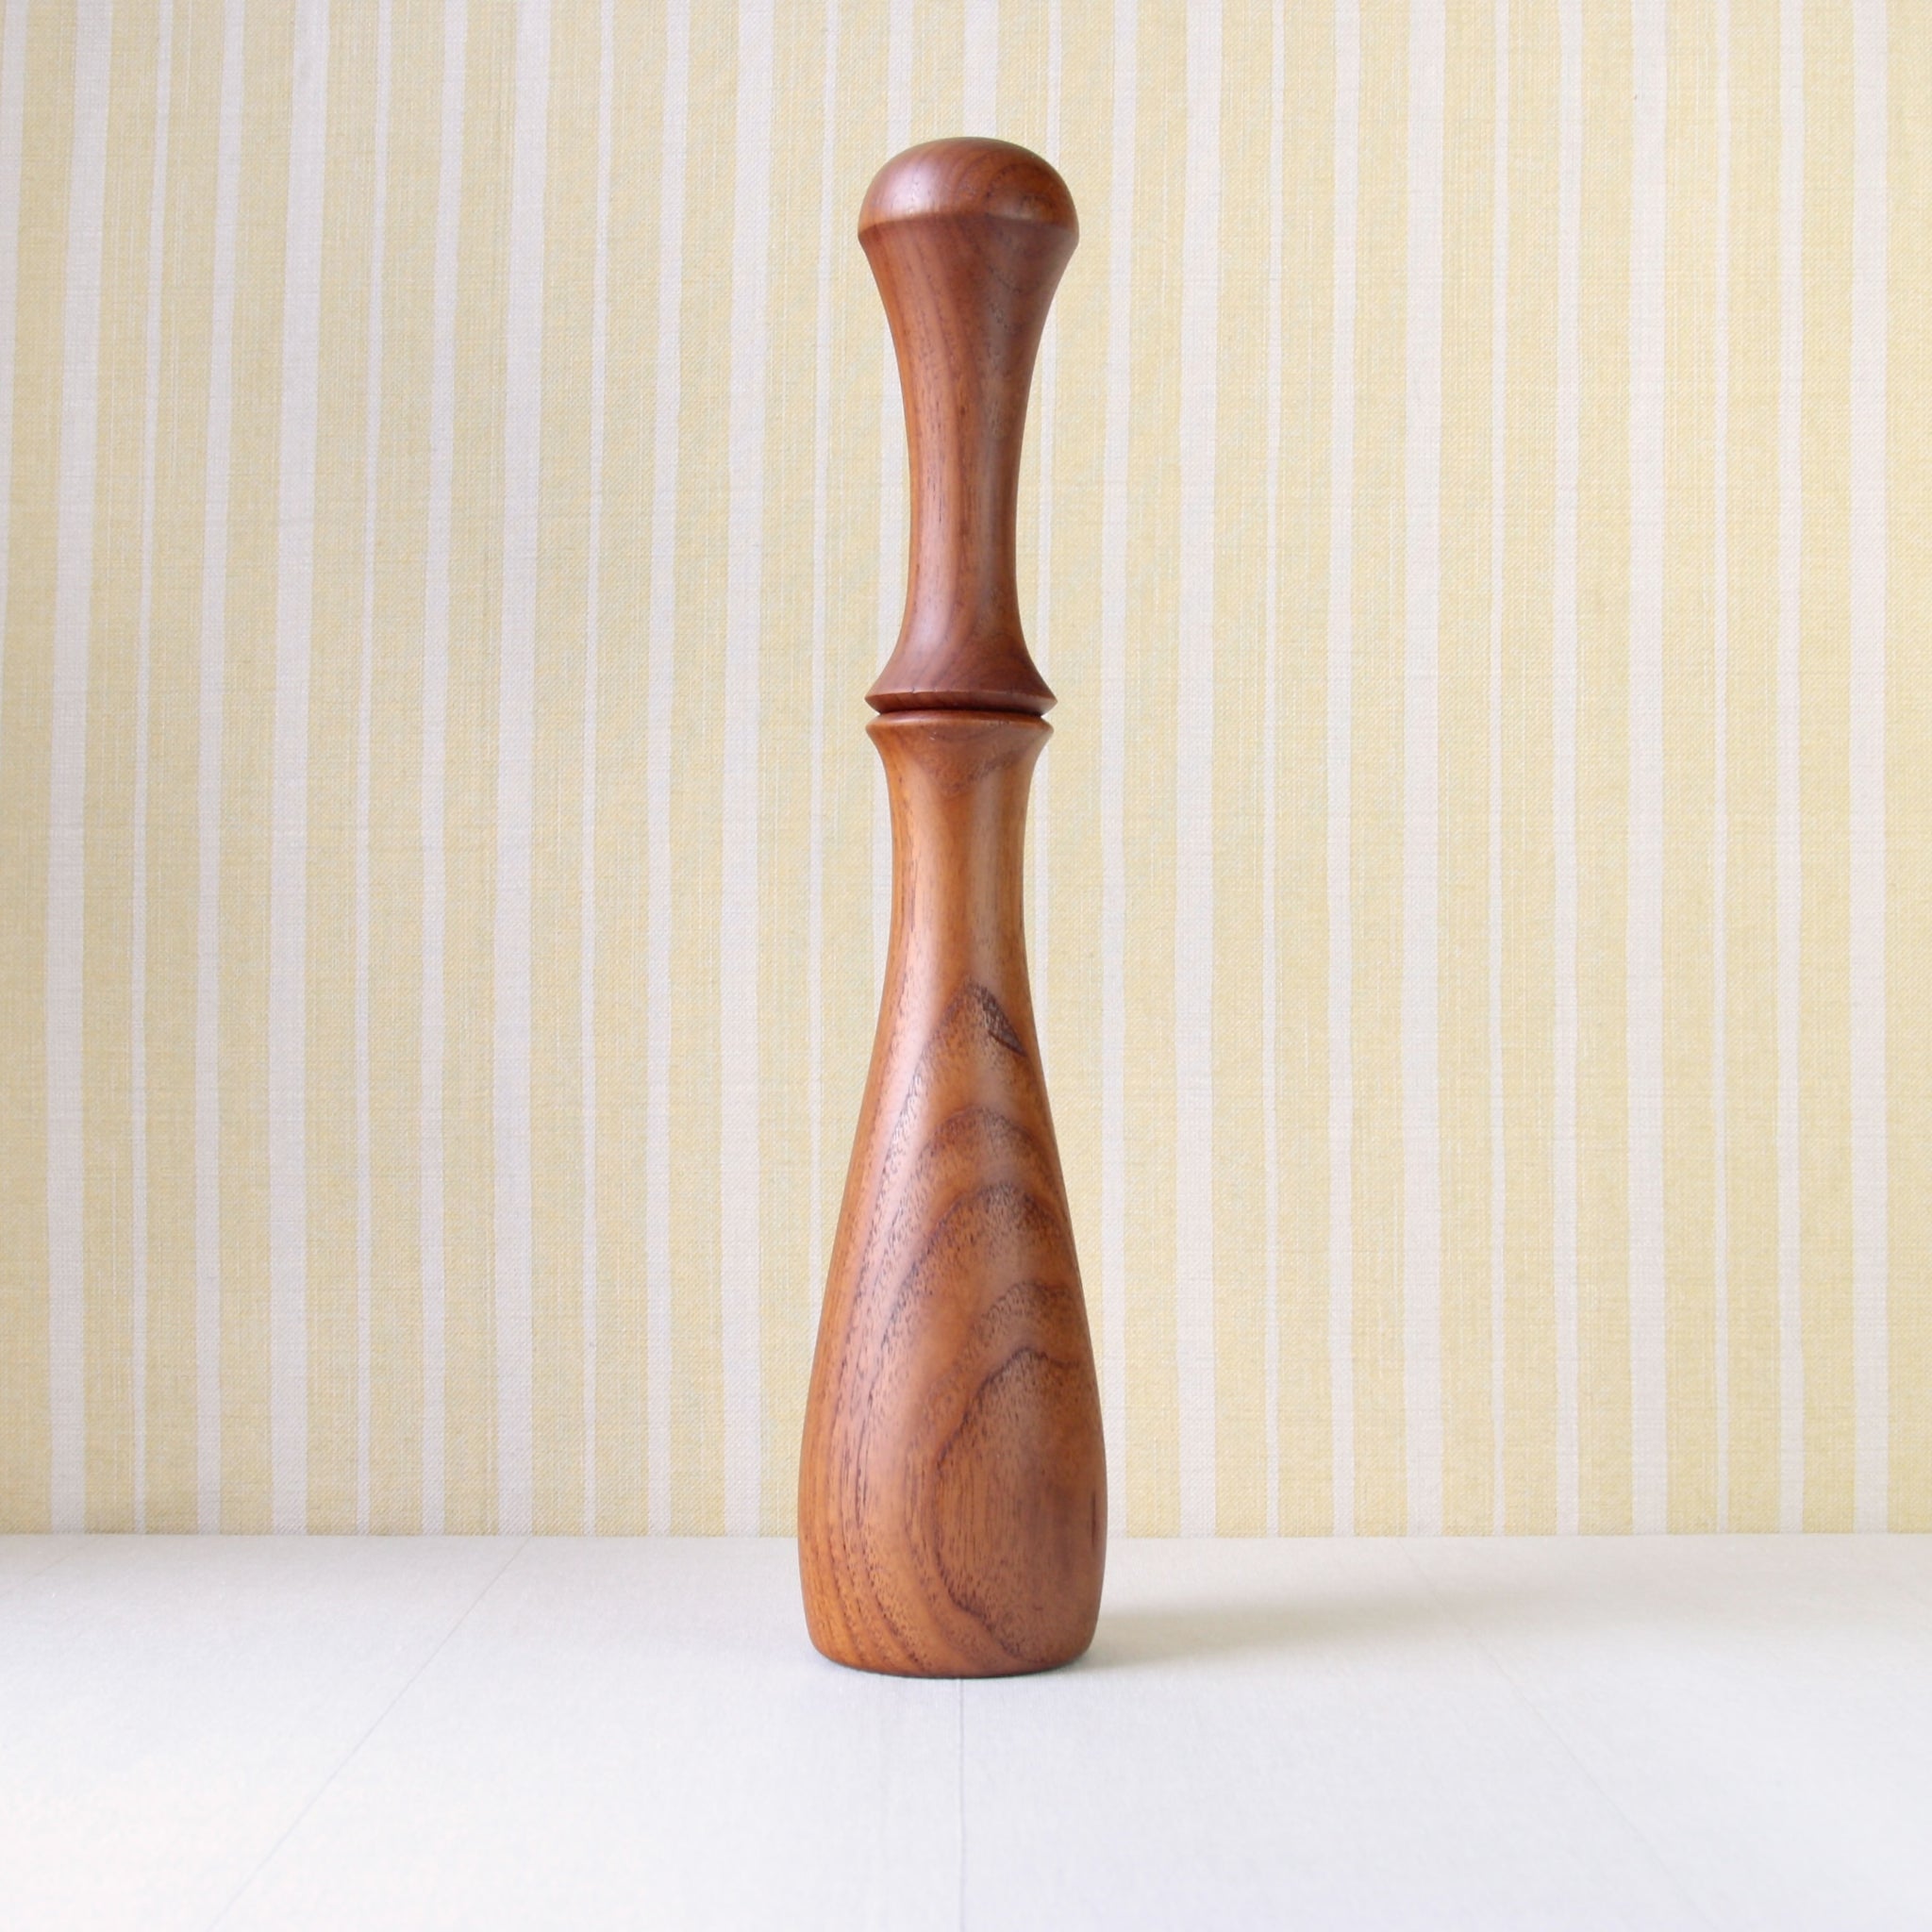 Profile image of a tall and sculptural collectible Danish Jens Quistgaard 893 pepper mill, a rare Scandinavian design crafted from solid teak. For sale in the UK. Available for worldwide delivery.